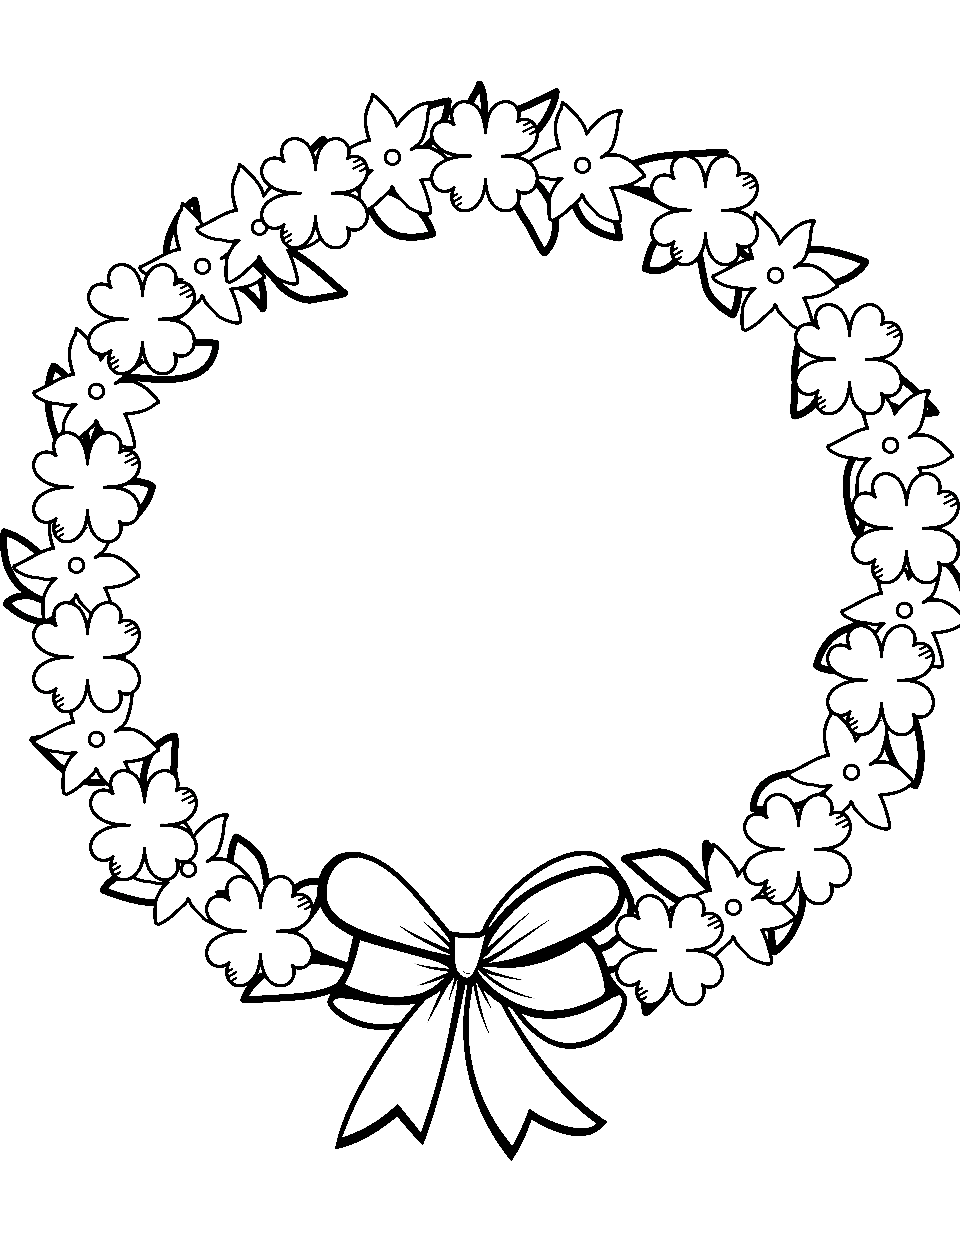 Happy St. Patrick's Day Wreath Coloring Page - A festive wreath made of clovers and ribbons celebrating the occasion.